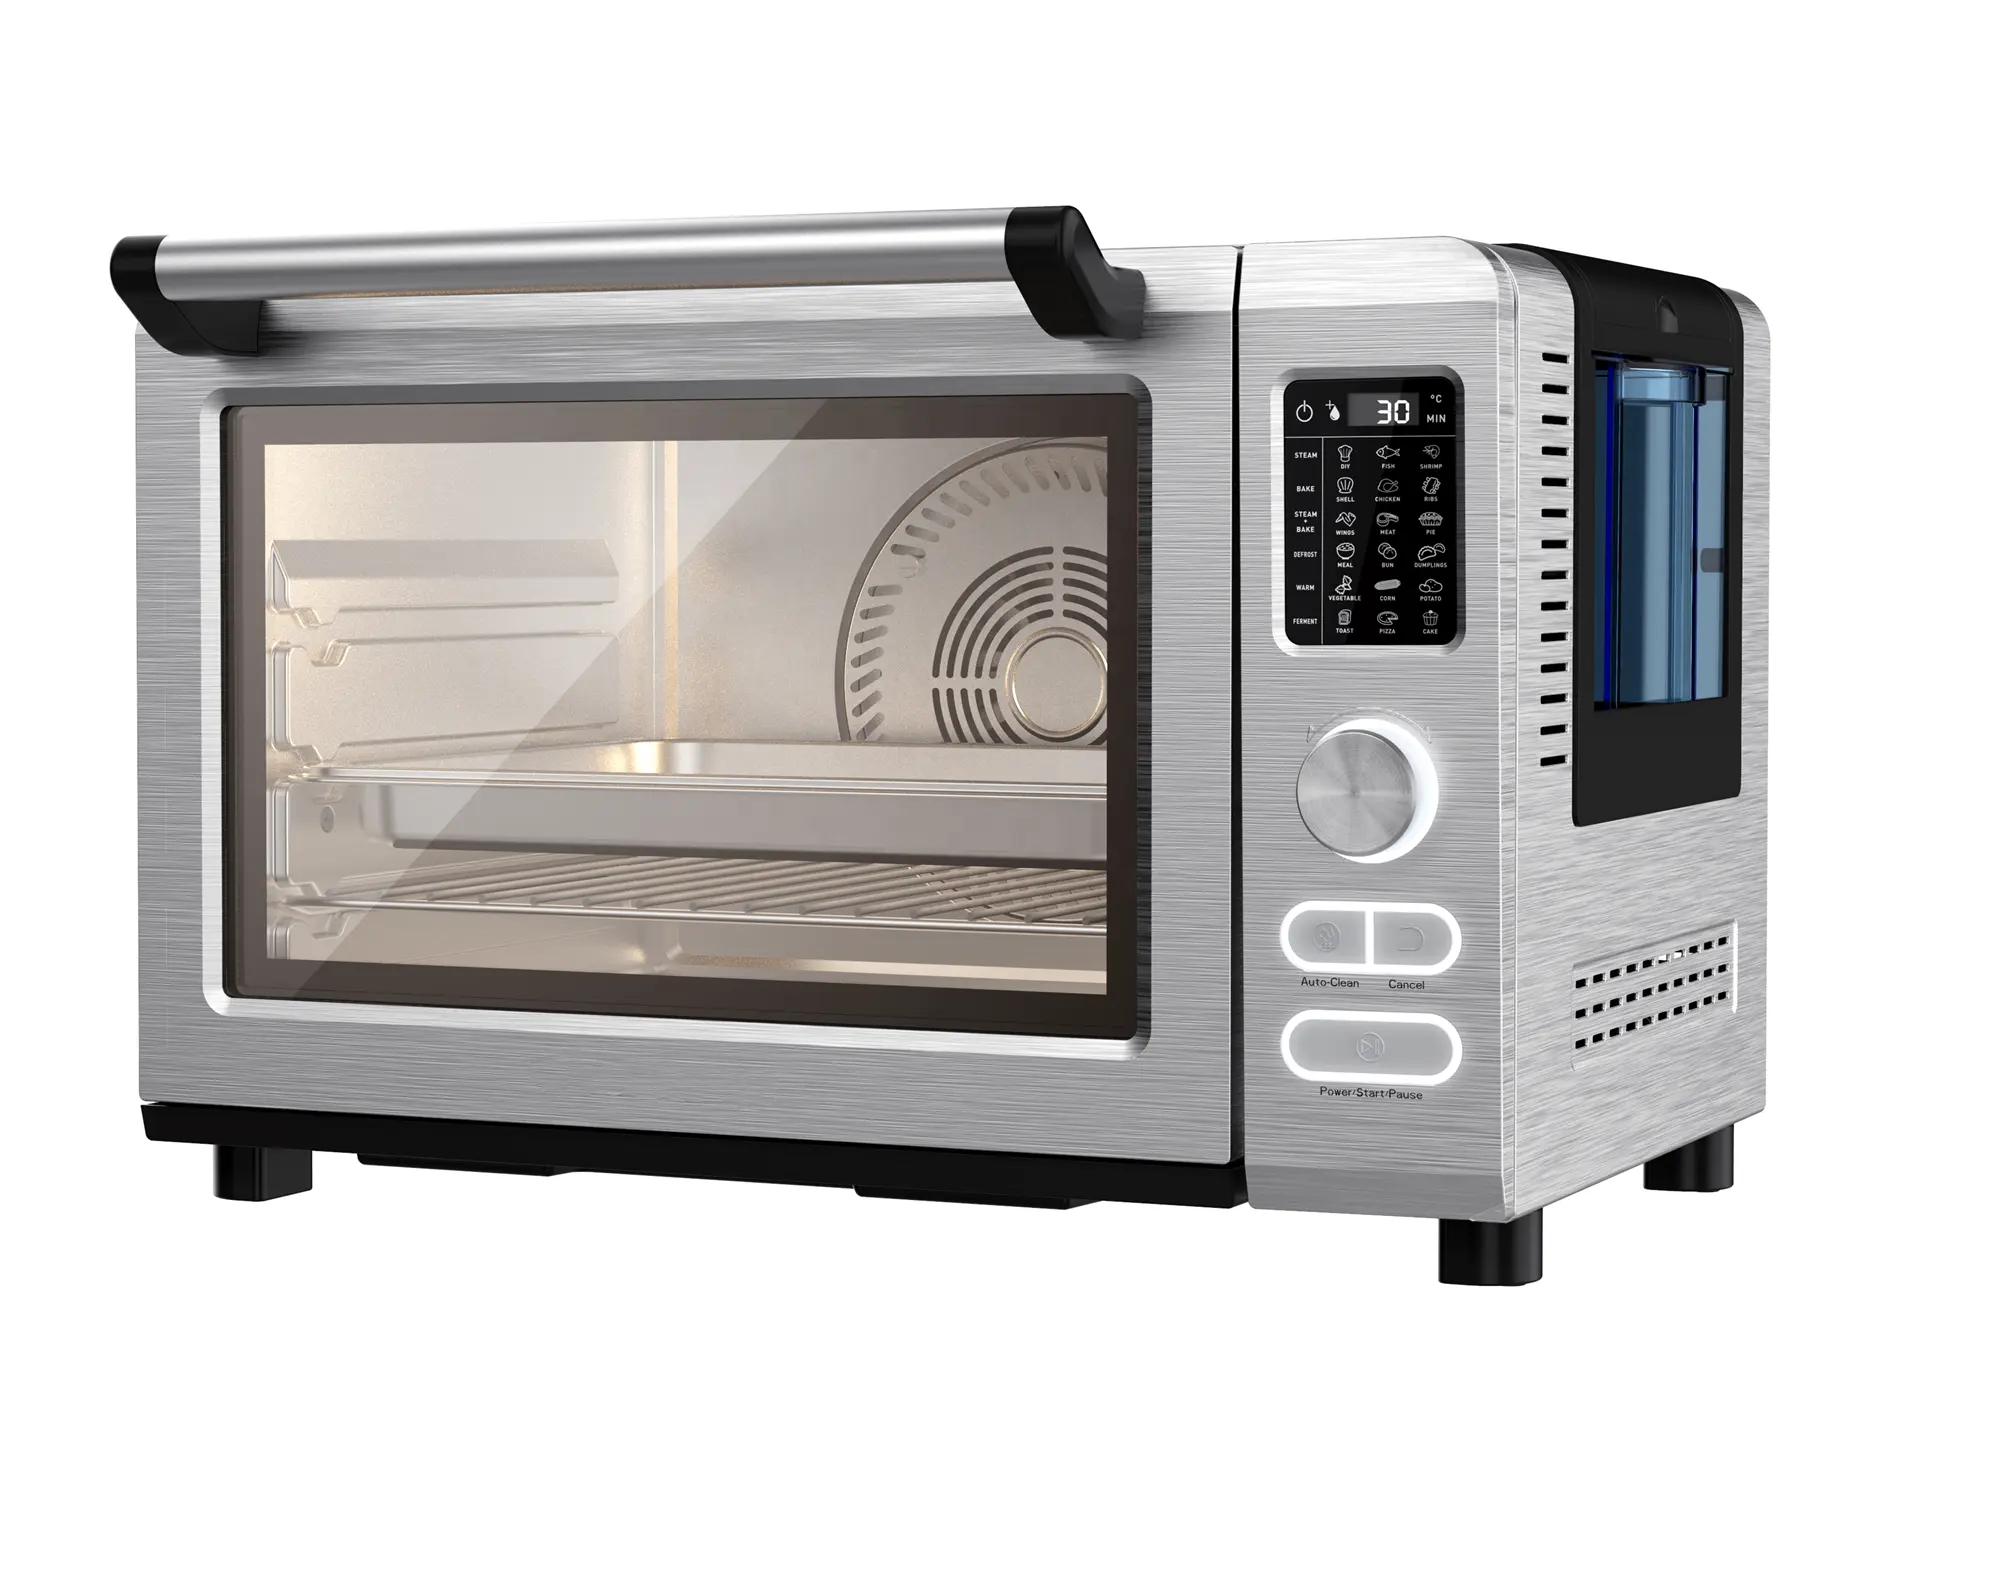 Kingpower Steam Oven KE826AS1+R For Commercial/Household Catering/Bakery Baking Oven For Food Truck Or Coffee Shop